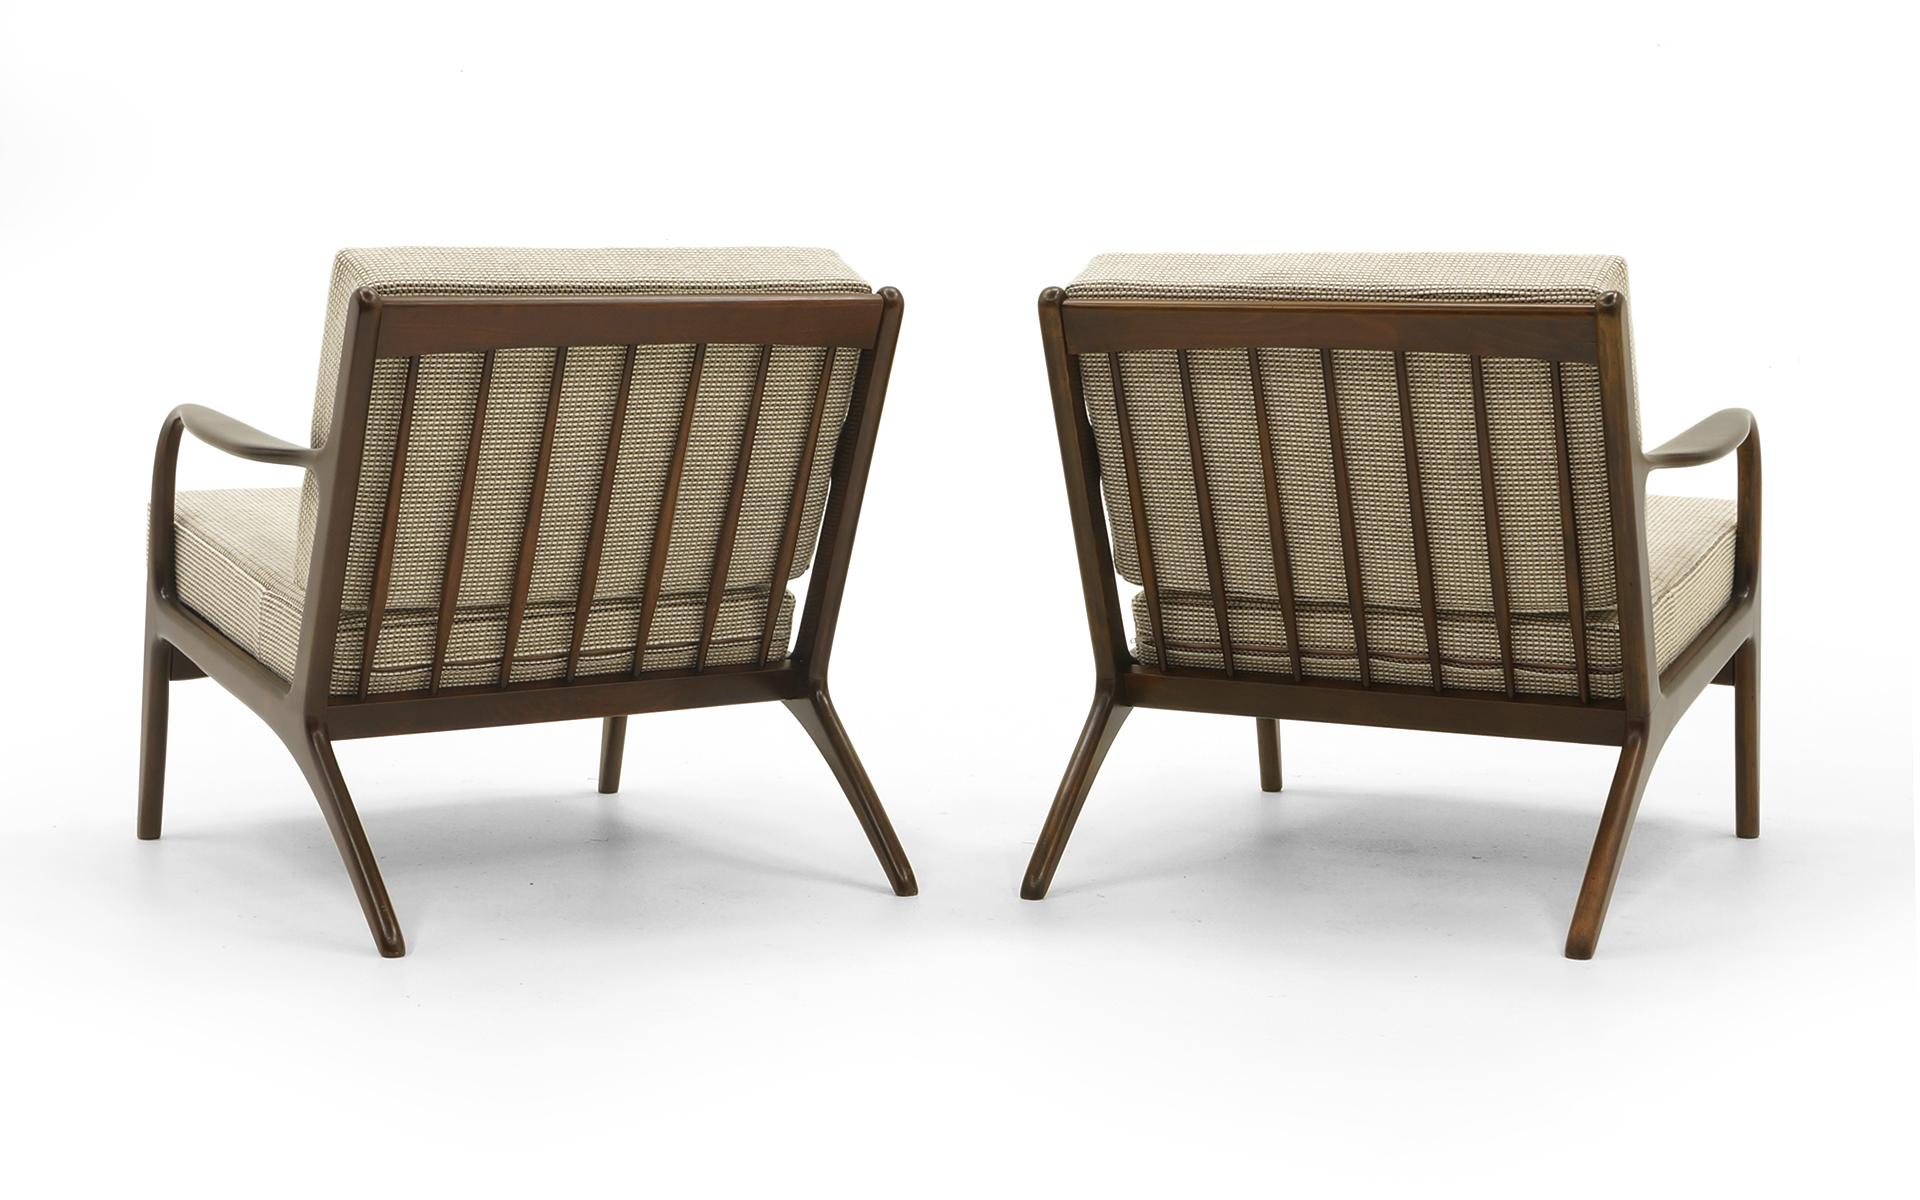 Upholstery Pair Kofod-Larsen Danish Modern Lounge Chairs, Restored. PRICE IS FOR THE PAIR.